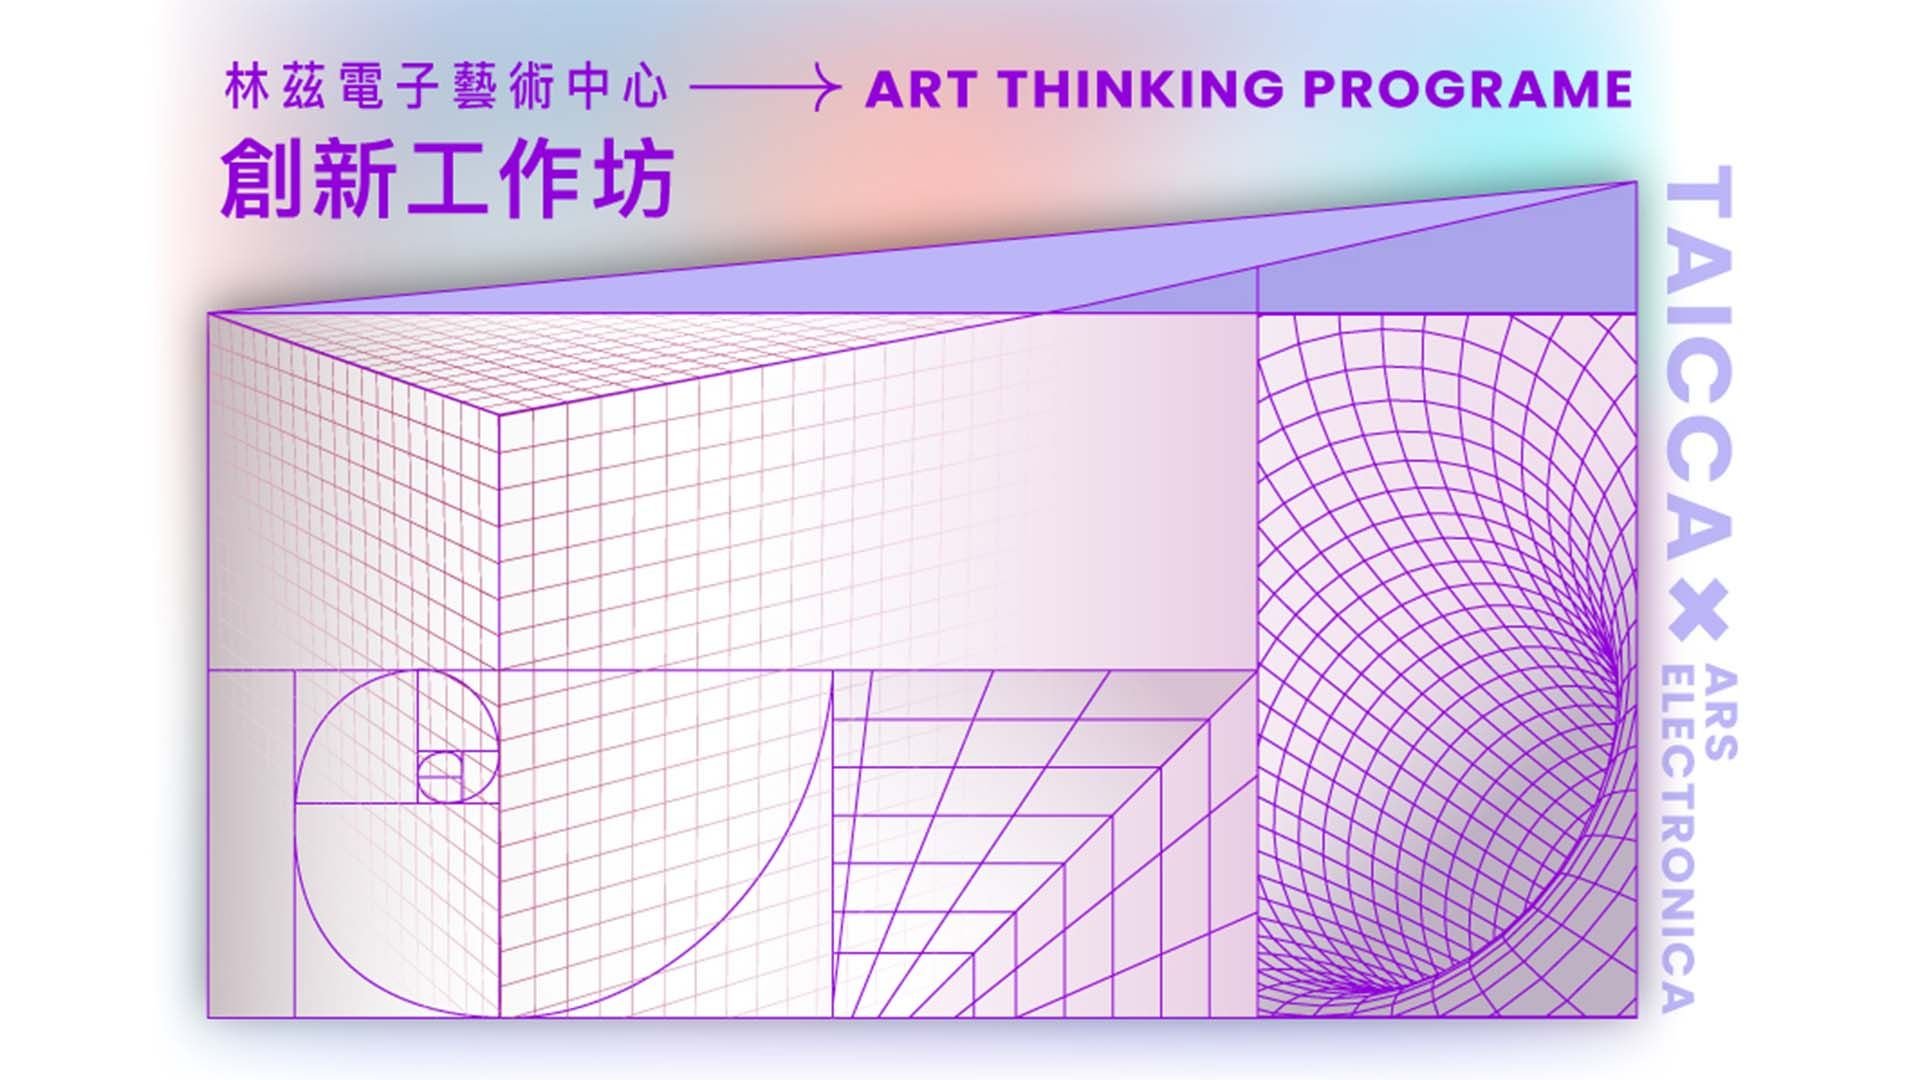 TAICCA x Ars Electronica Art Thinking program - open call for Taiwanese projects